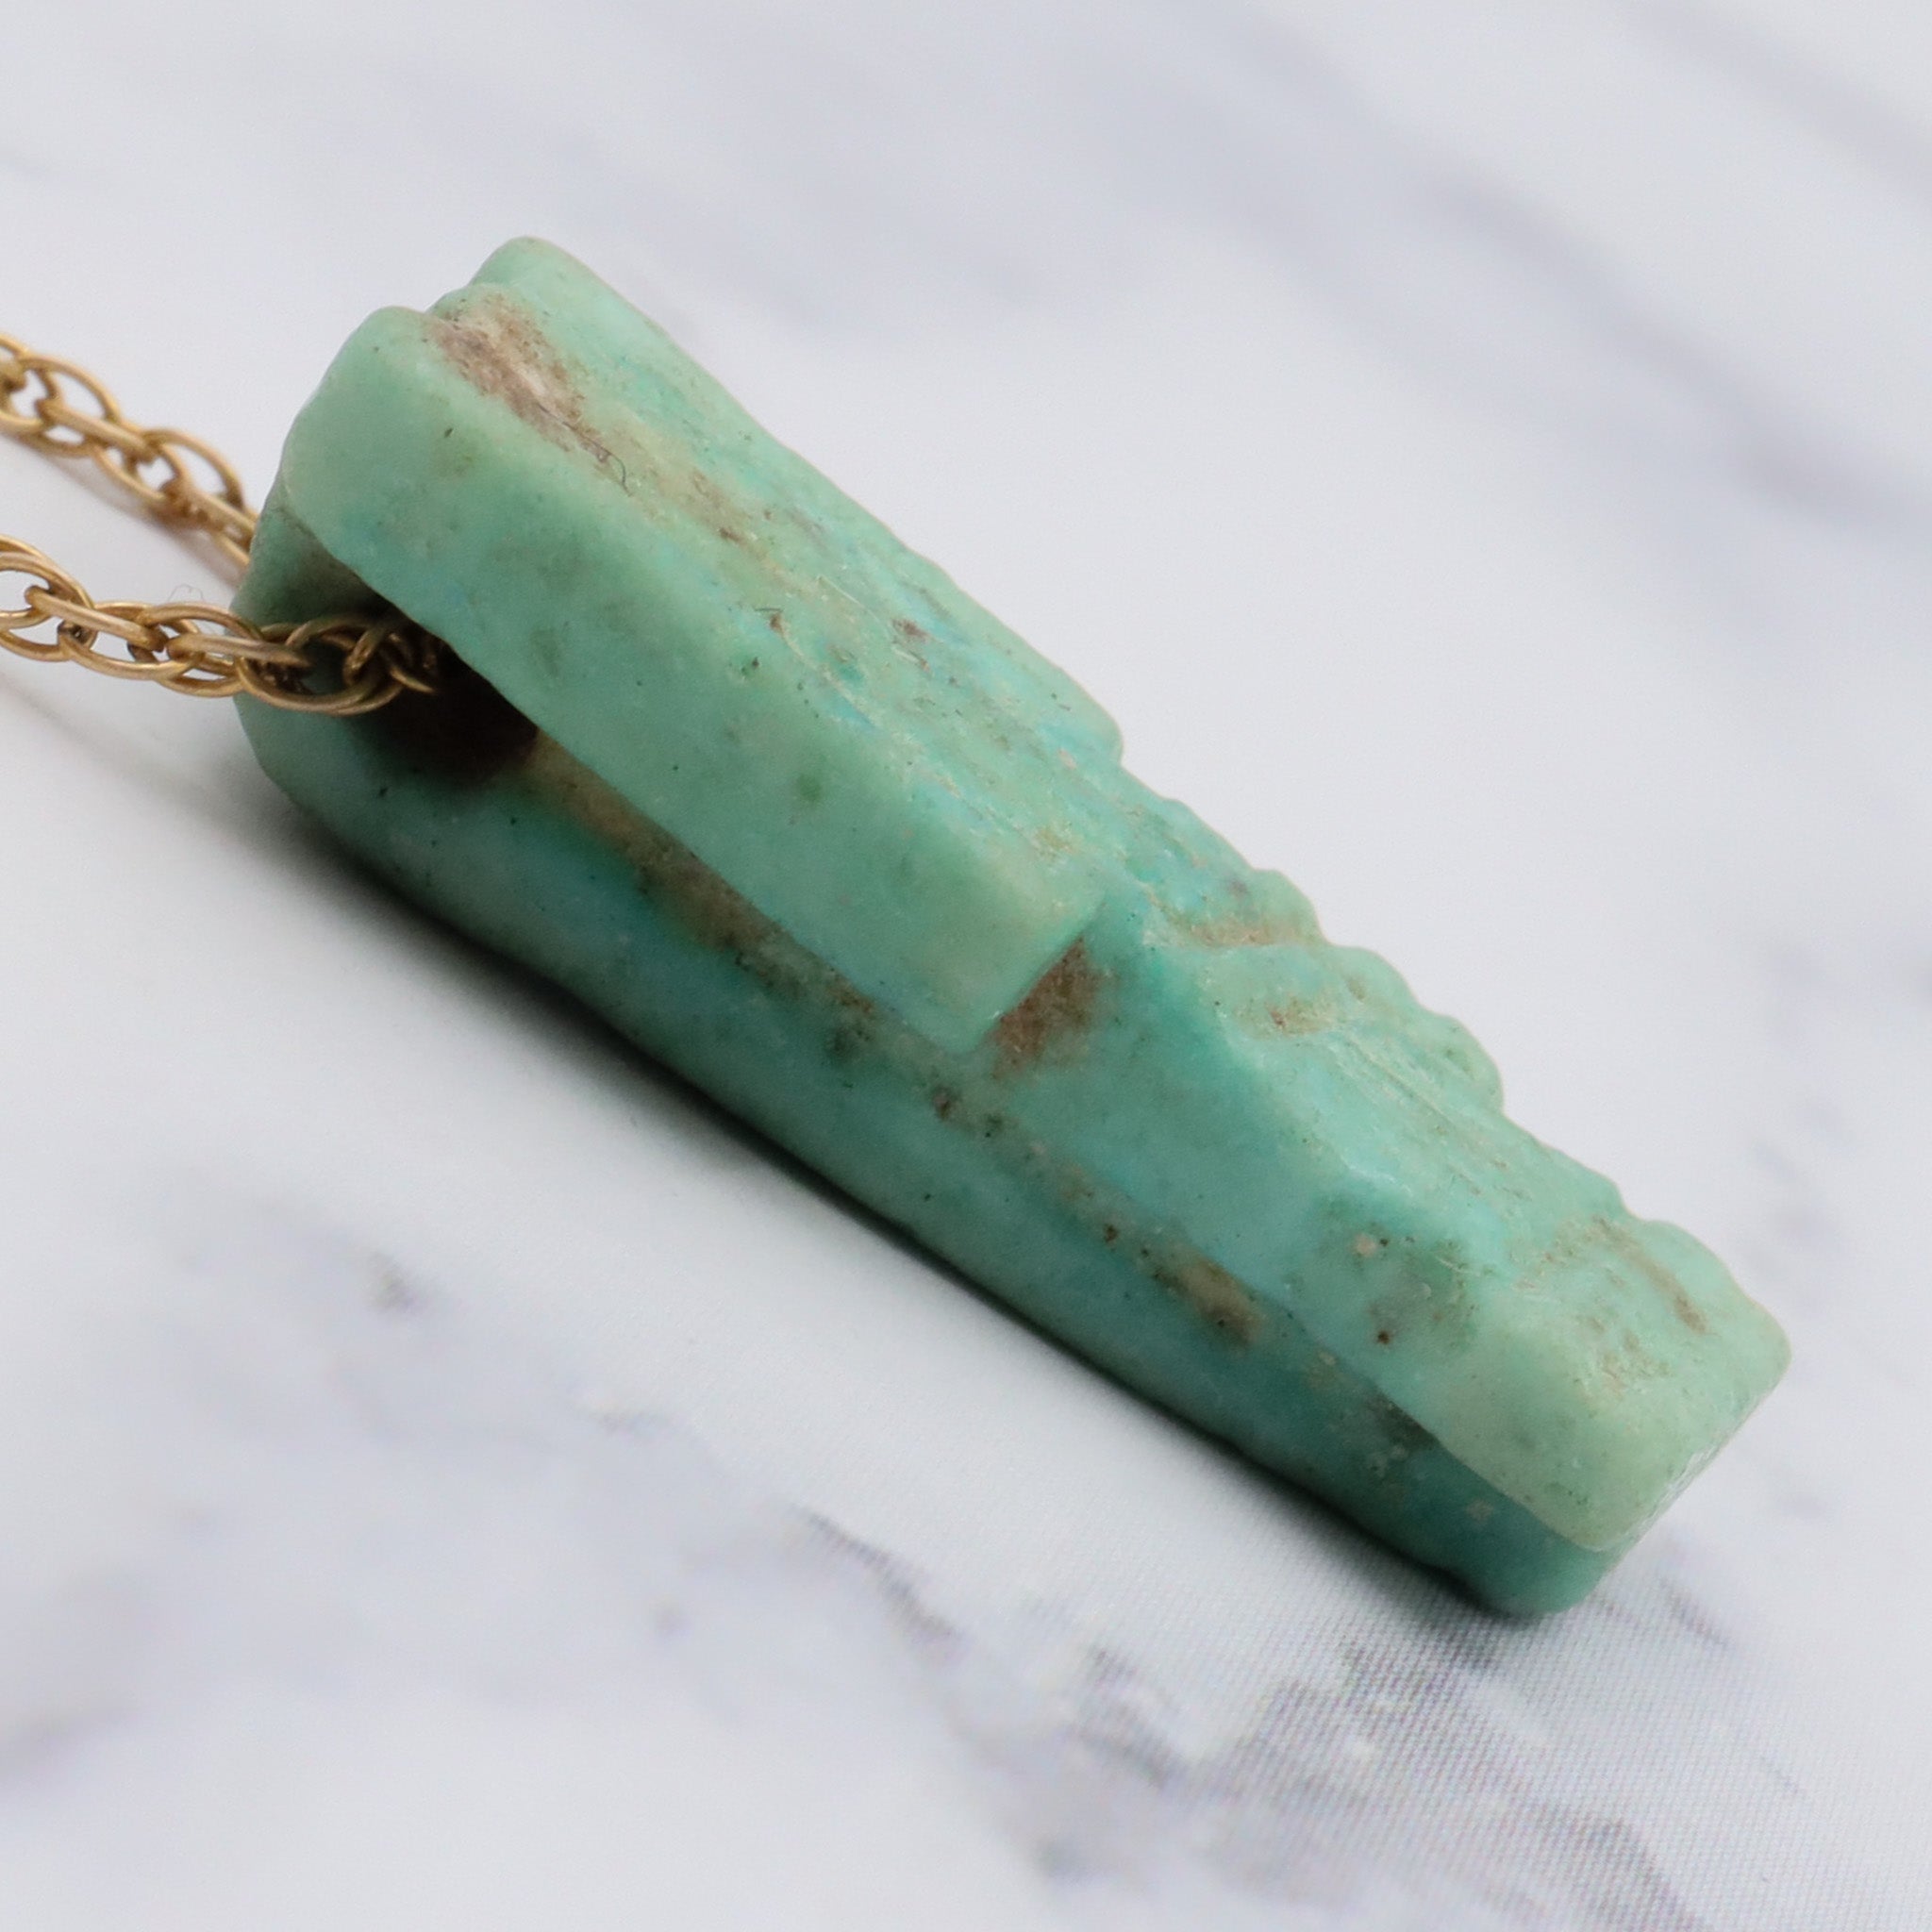 22k Gold Ancient carved Amazonite bead handmade necklace